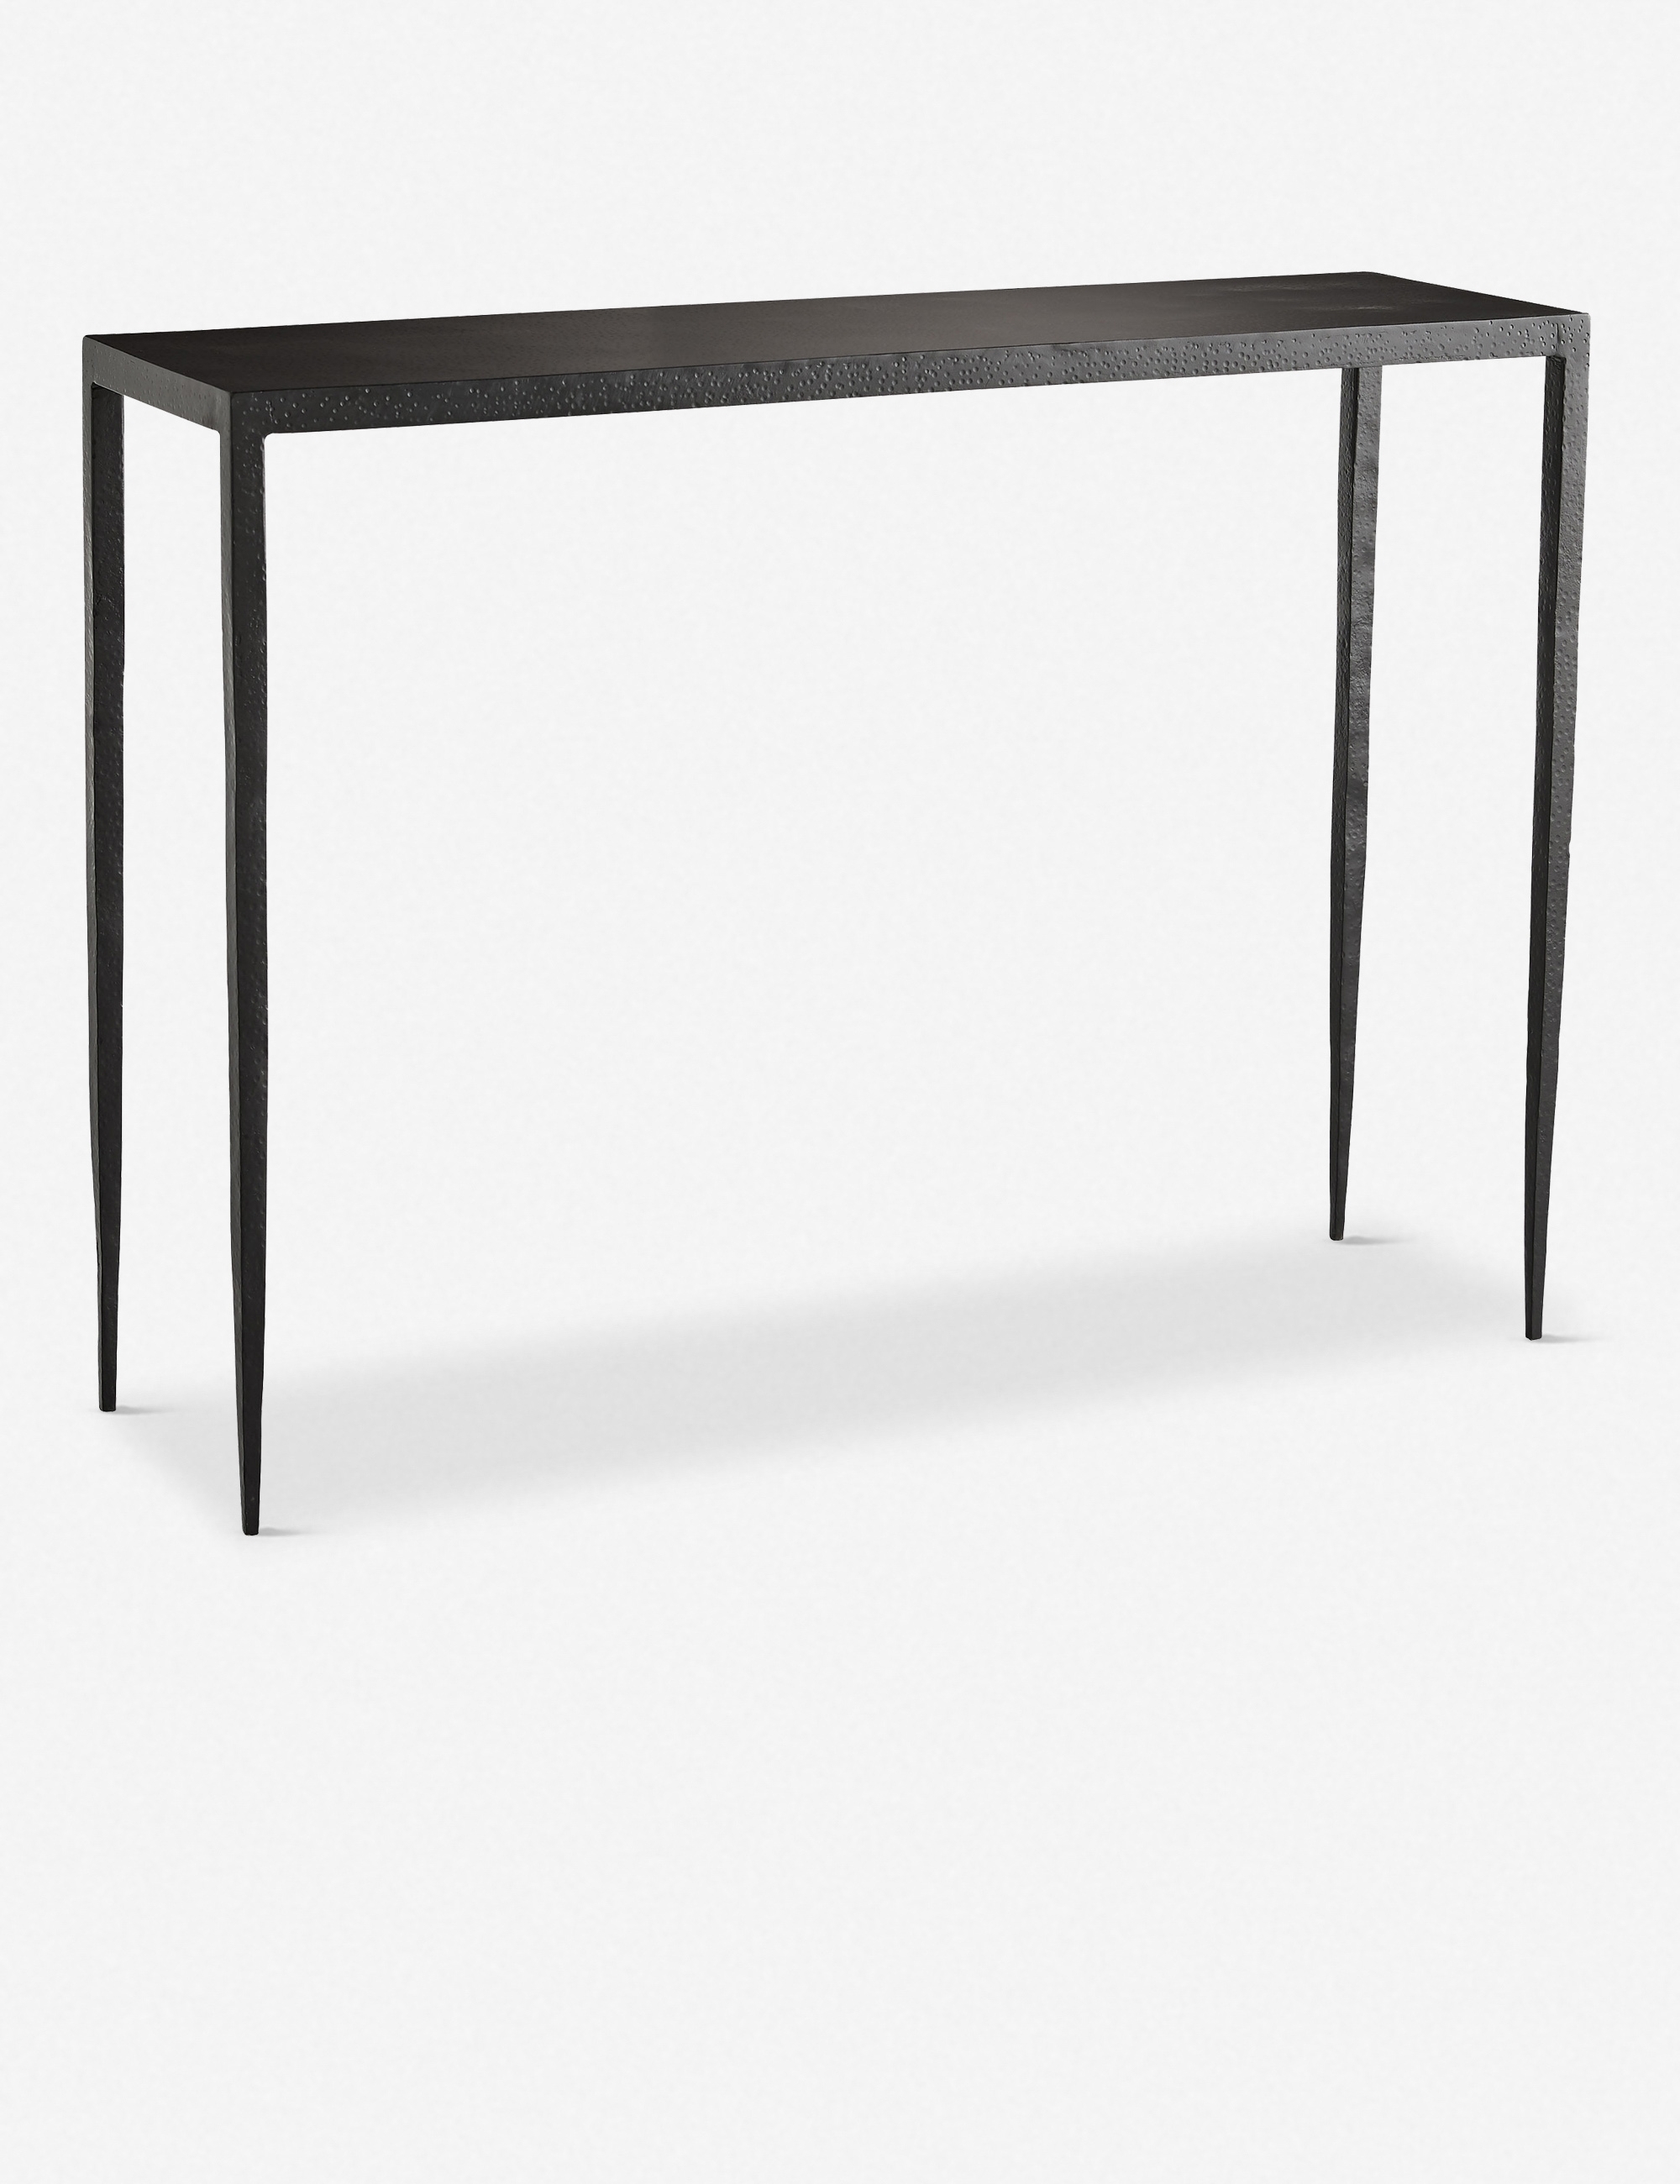 Hogan Console Table by Arteriors - Image 1